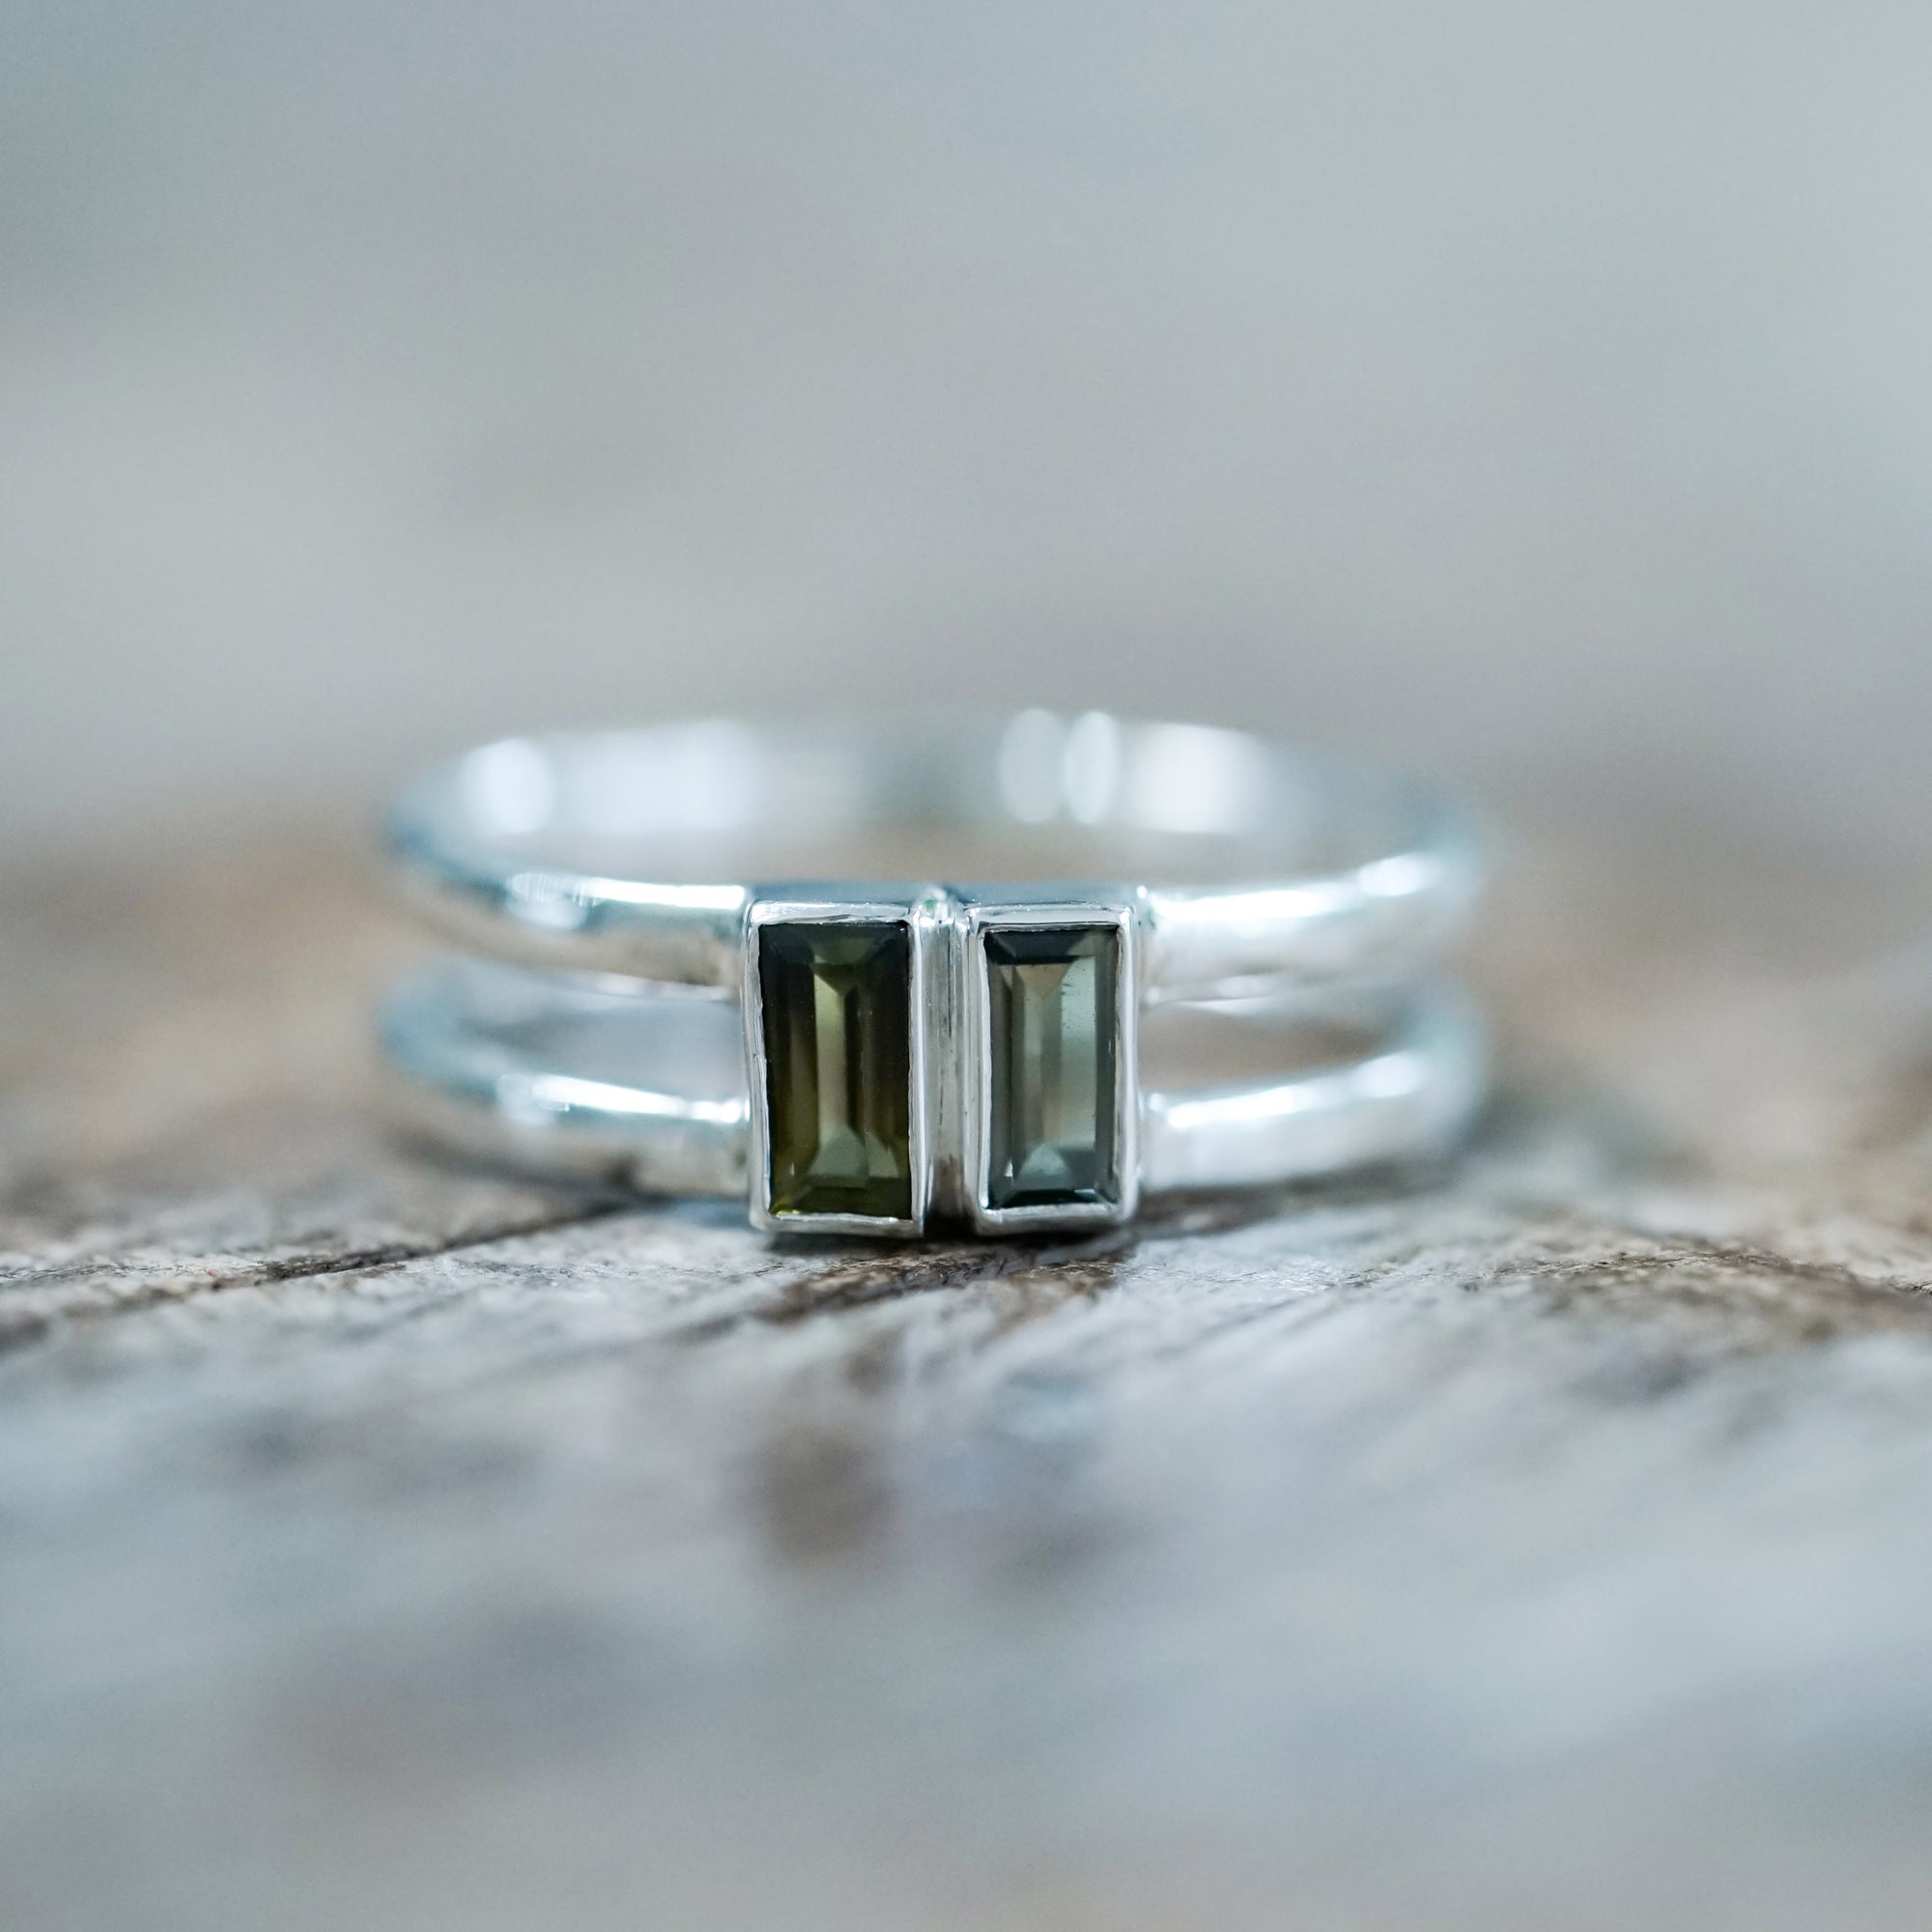 Double Tourmaline Ring - Size 5.75